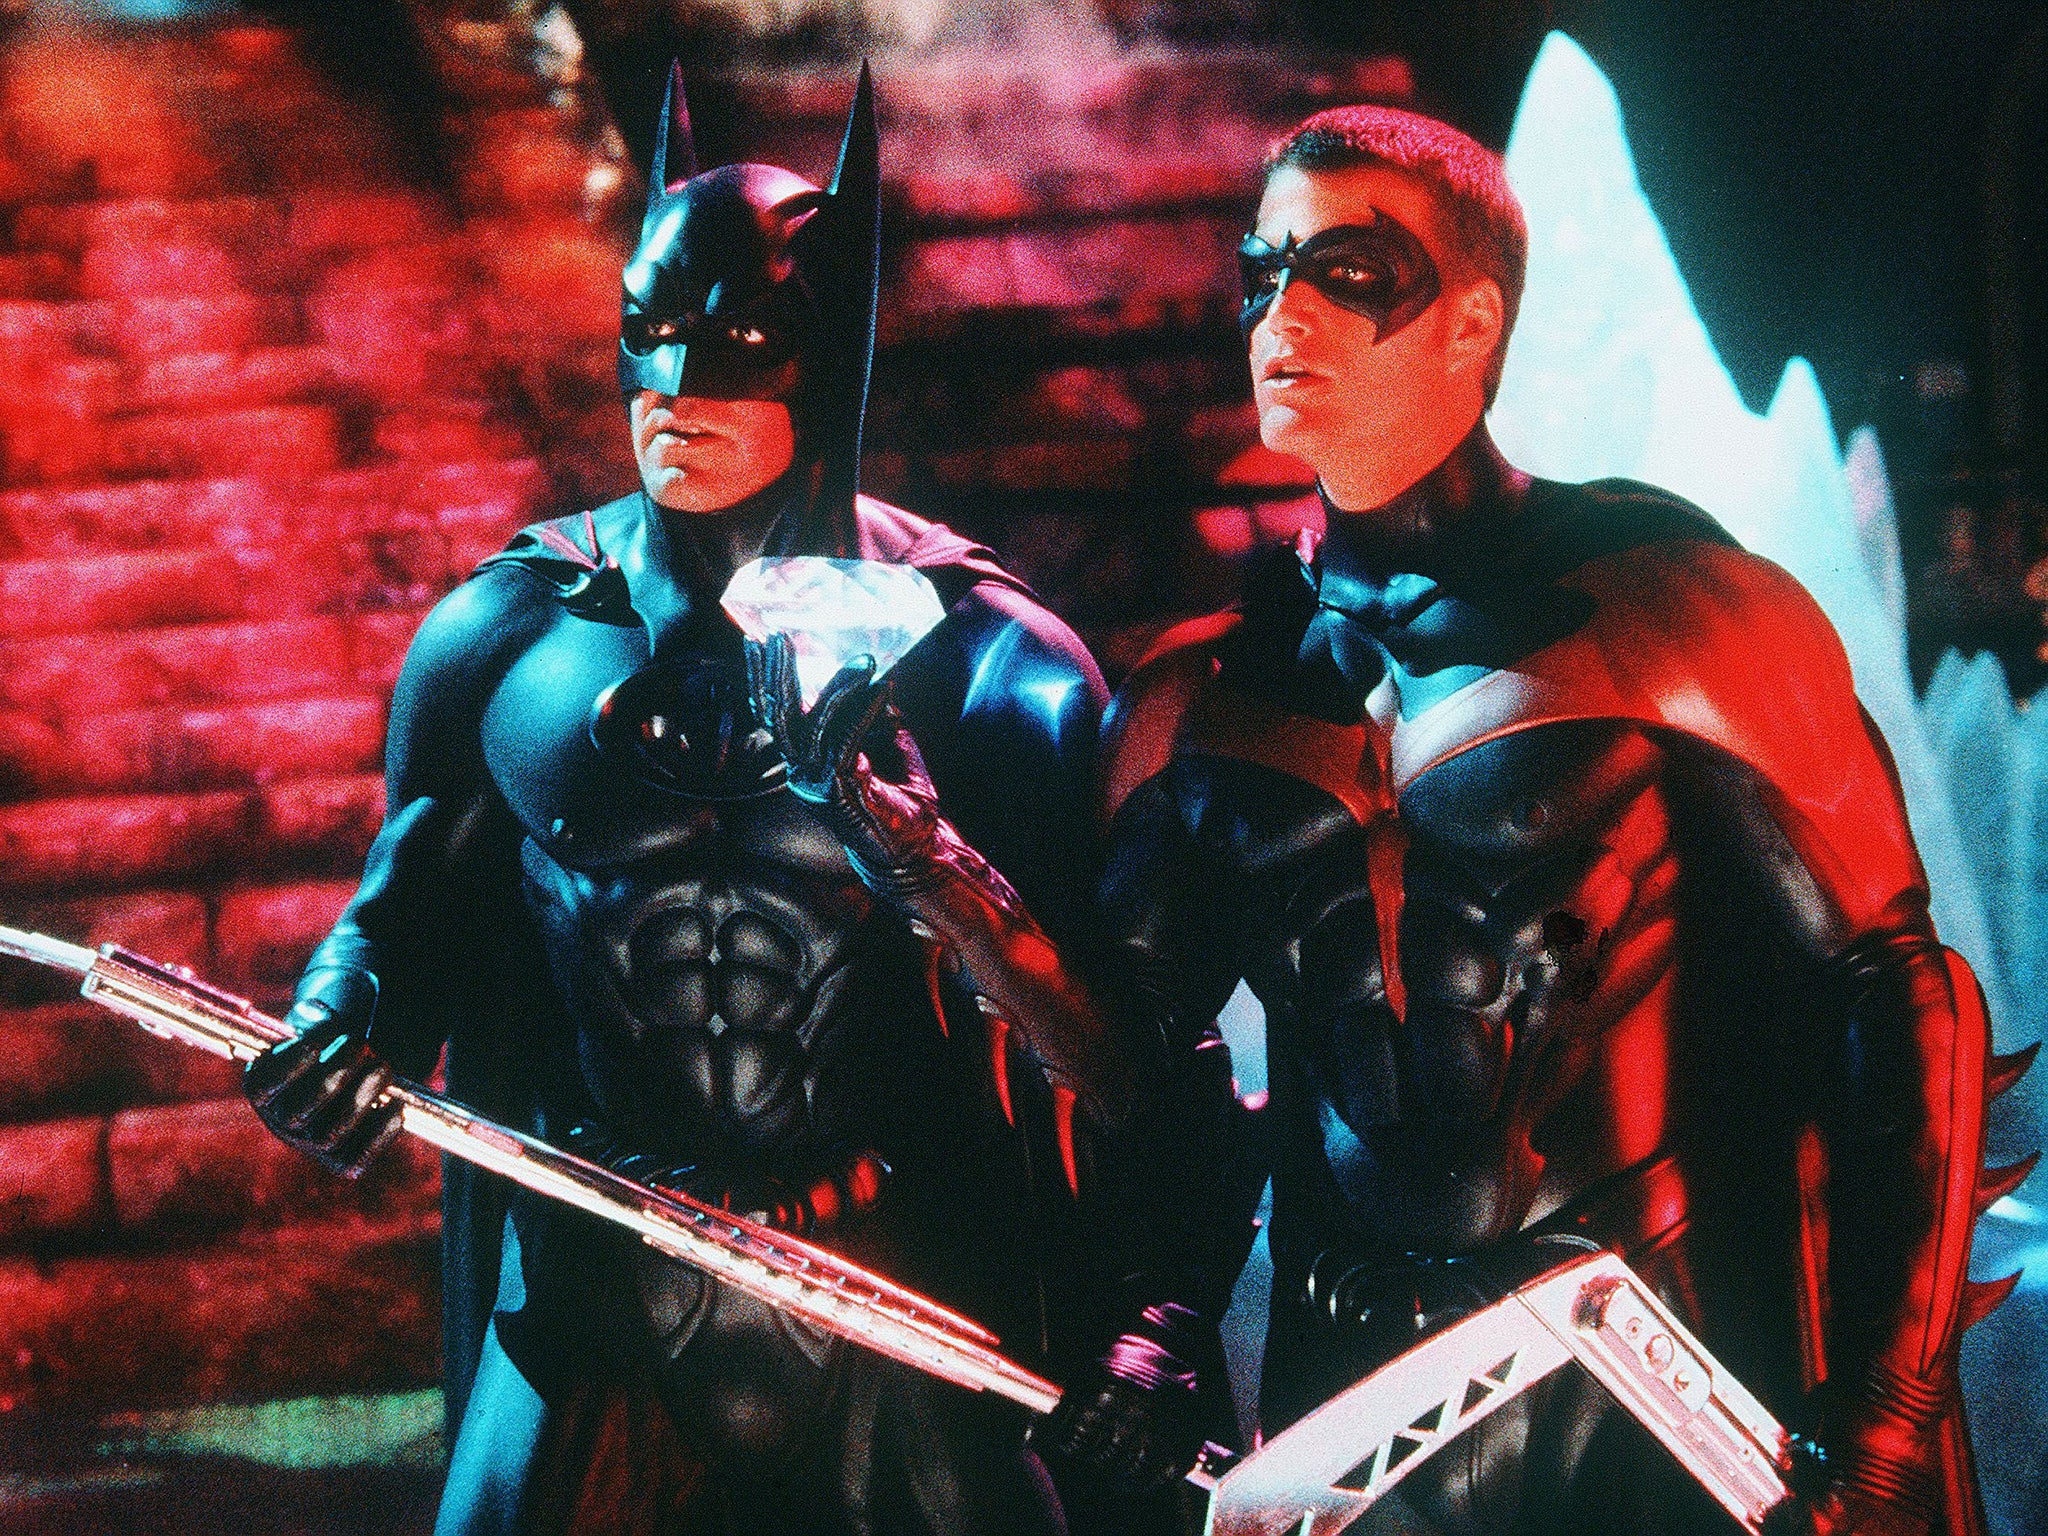 ‘It’s the hockey team from hell!’: George Clooney and Chris O’Donnell in ‘Batman & Robin'